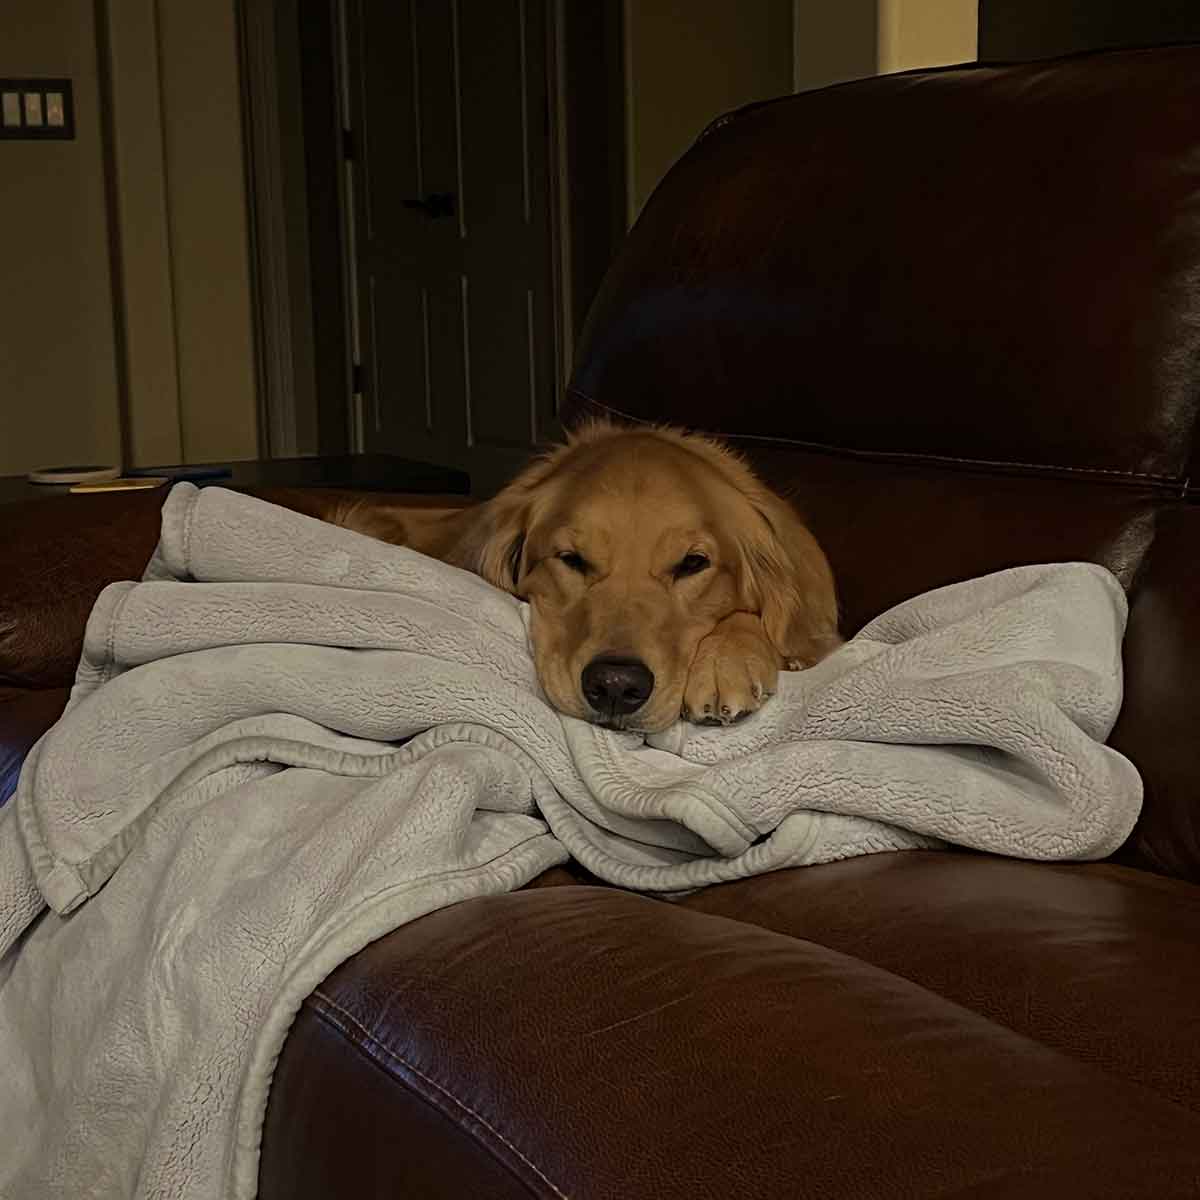 Golden Retriever dog laying on a cough with her head on a blue blanket.